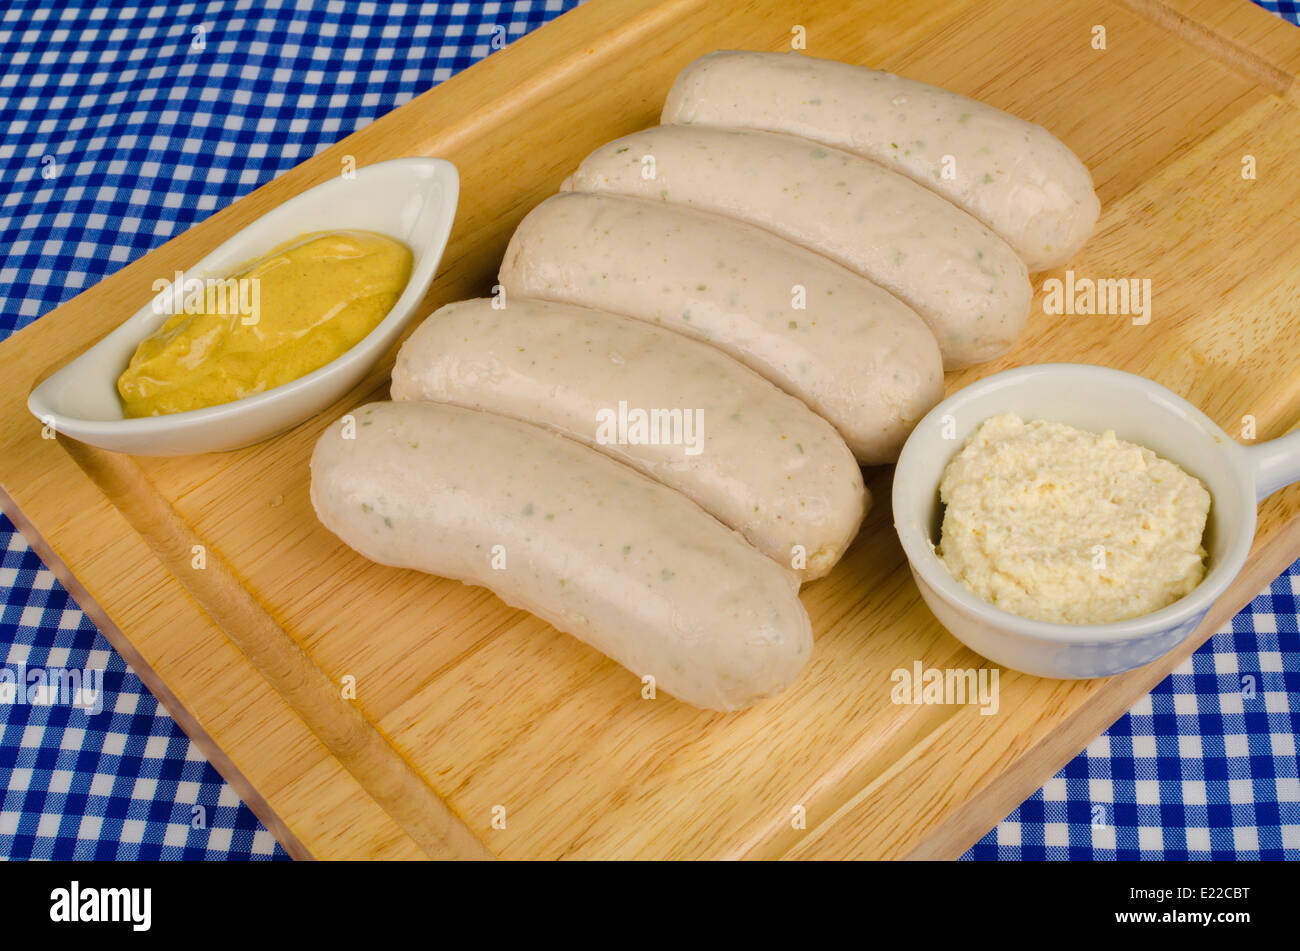 Raw sausages on a chopping board with some ingredients Stock Photo